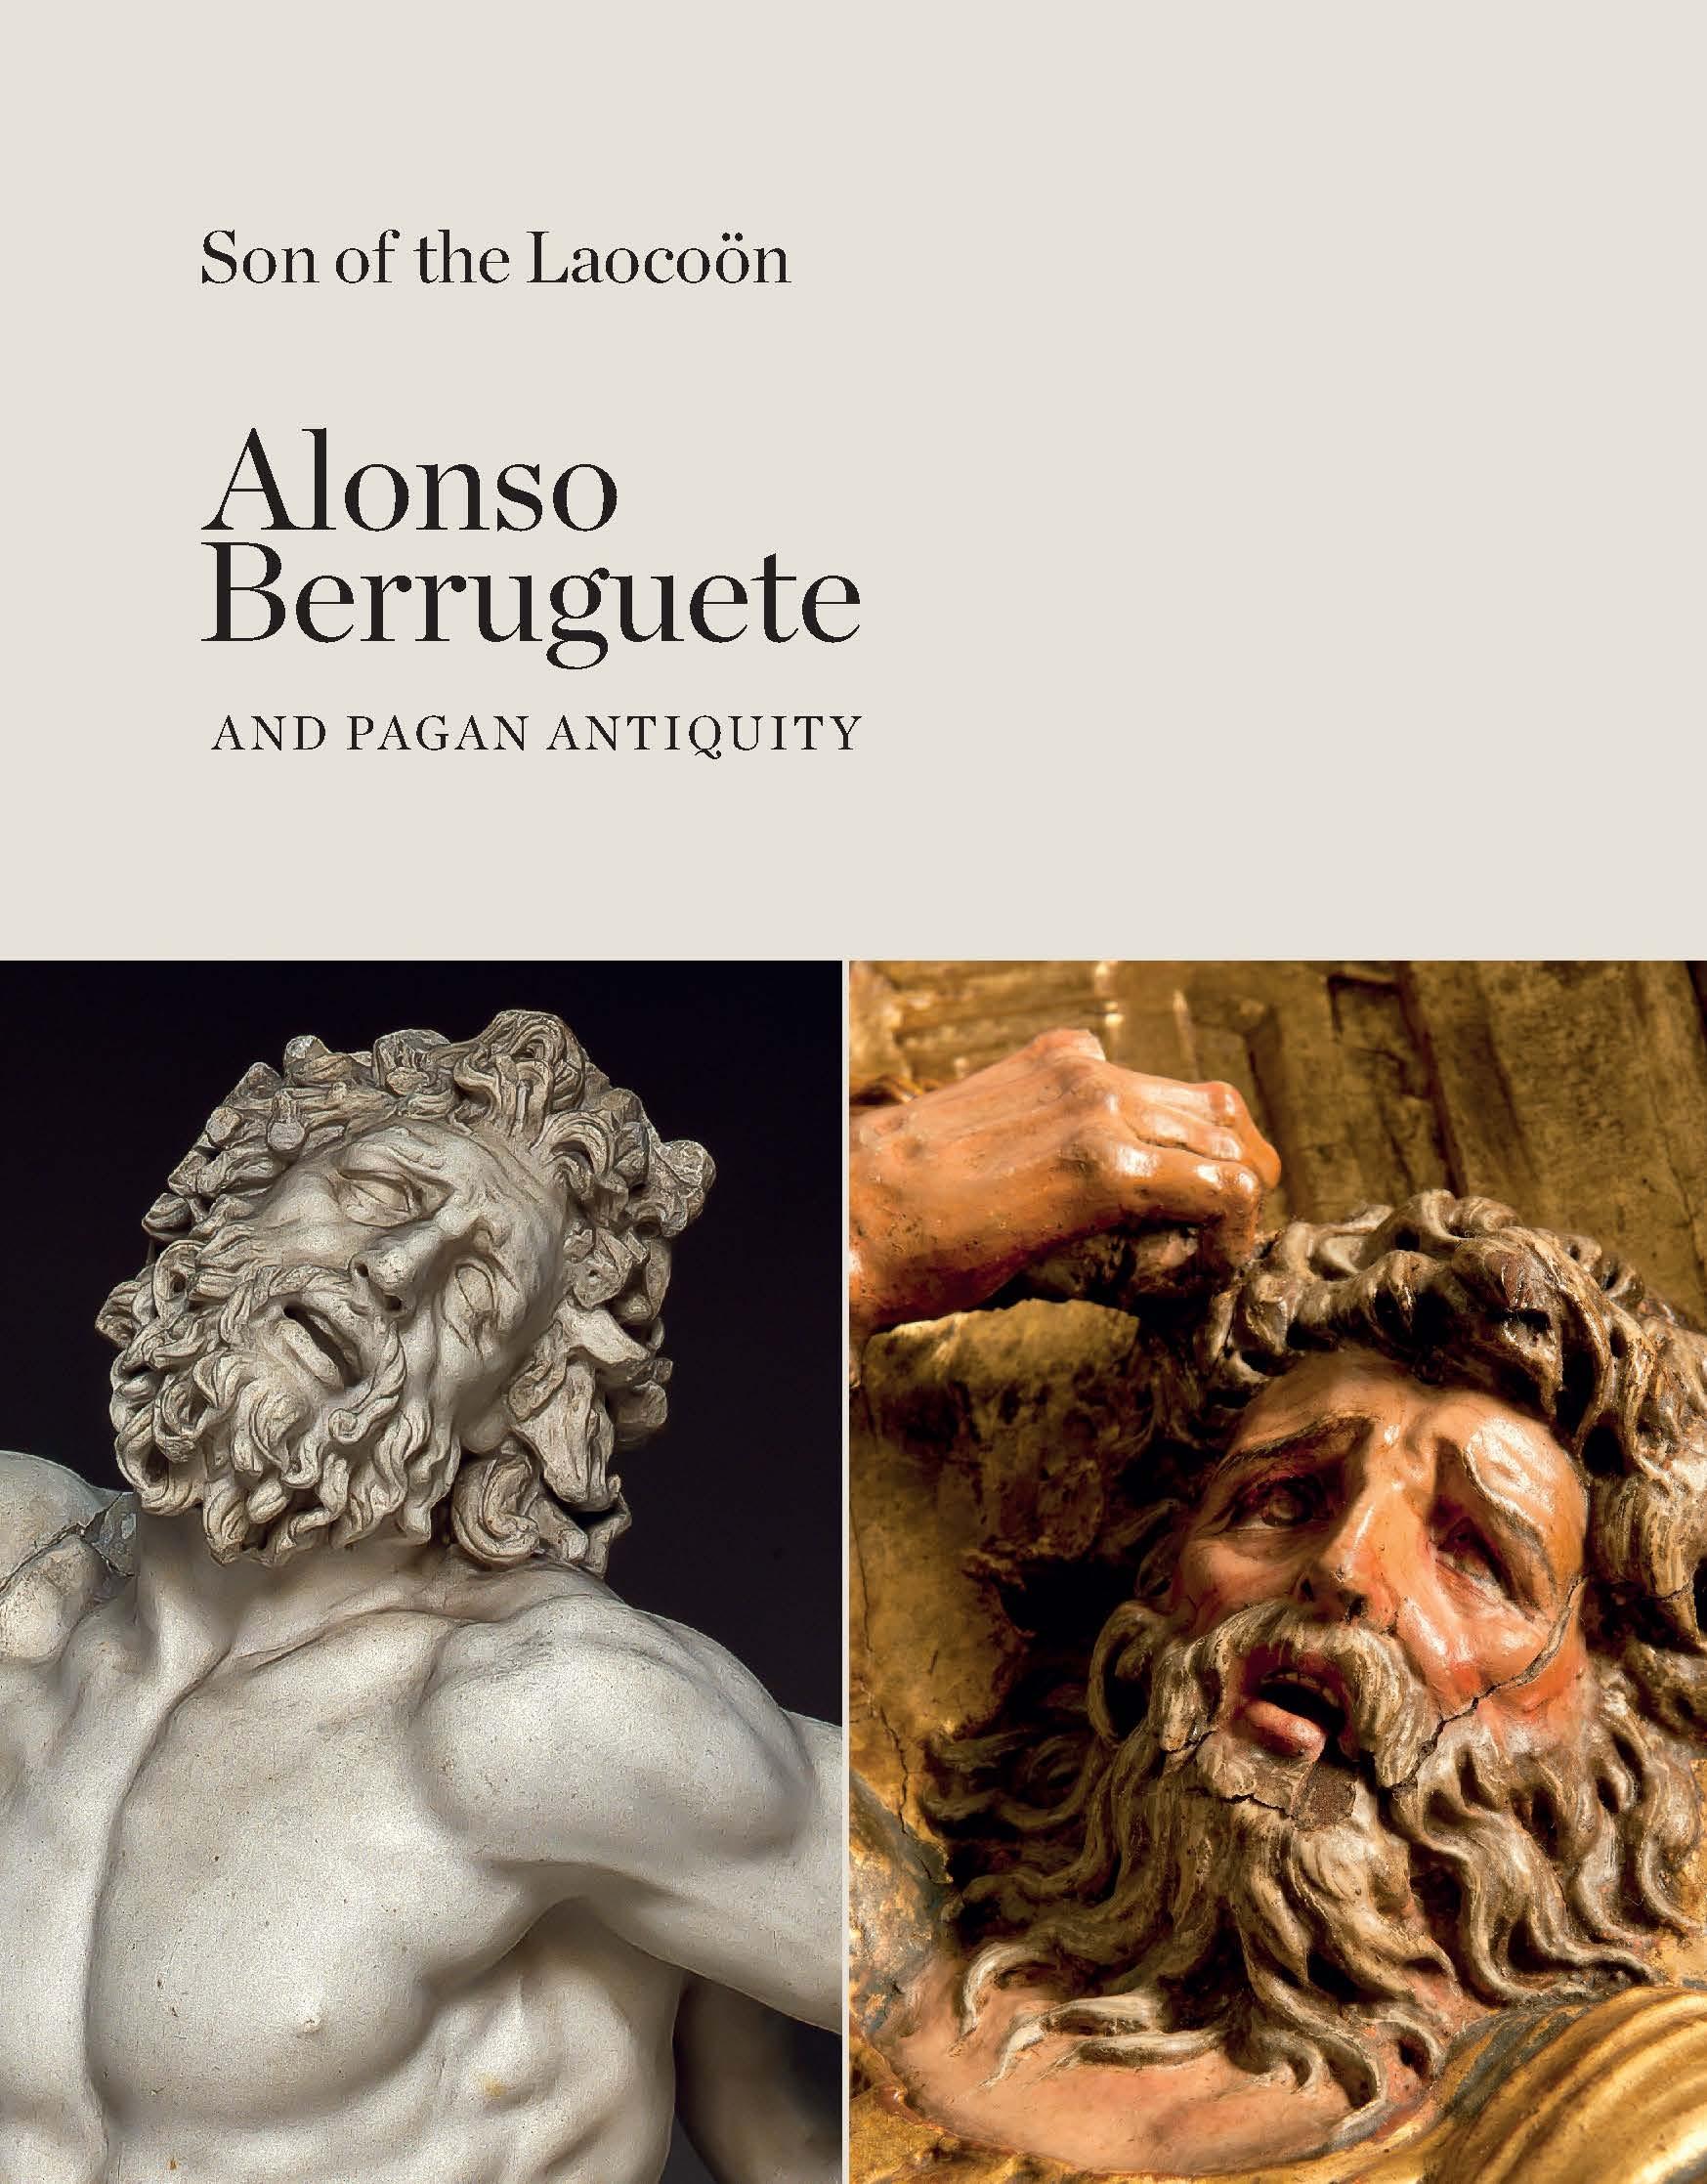 SON OF THE LAOCOON  ALONSO DE BERRUGUETE  AND PAGAN ANTIQUITY